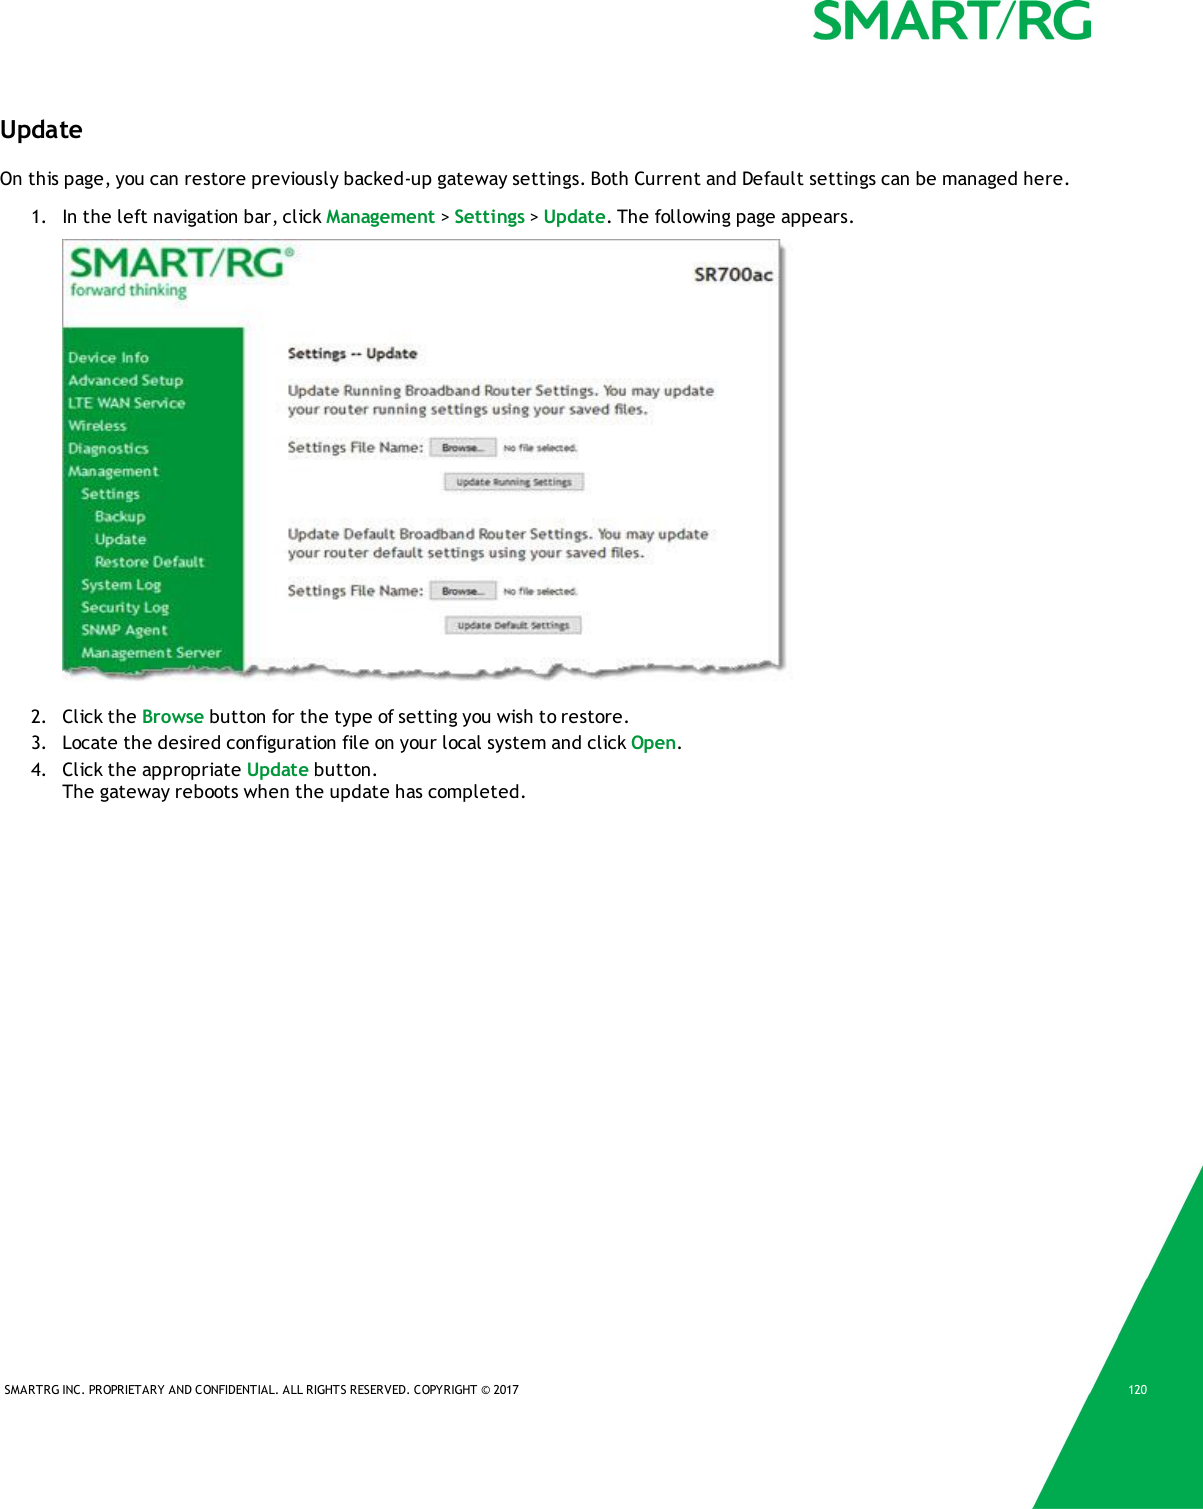 SMARTRG INC. PROPRIETARY AND CONFIDENTIAL. ALL RIGHTS RESERVED. COPYRIGHT © 2017 120UpdateOn this page, you can restore previously backed-up gateway settings. Both Current and Default settings can be managed here.1. In the left navigation bar, click Management &gt;Settings &gt;Update. The following page appears.2. Click the Browse button for the type of setting you wish to restore.3. Locate the desired configuration file on your local system and click Open.4. Click the appropriate Update button.The gateway reboots when the update has completed.